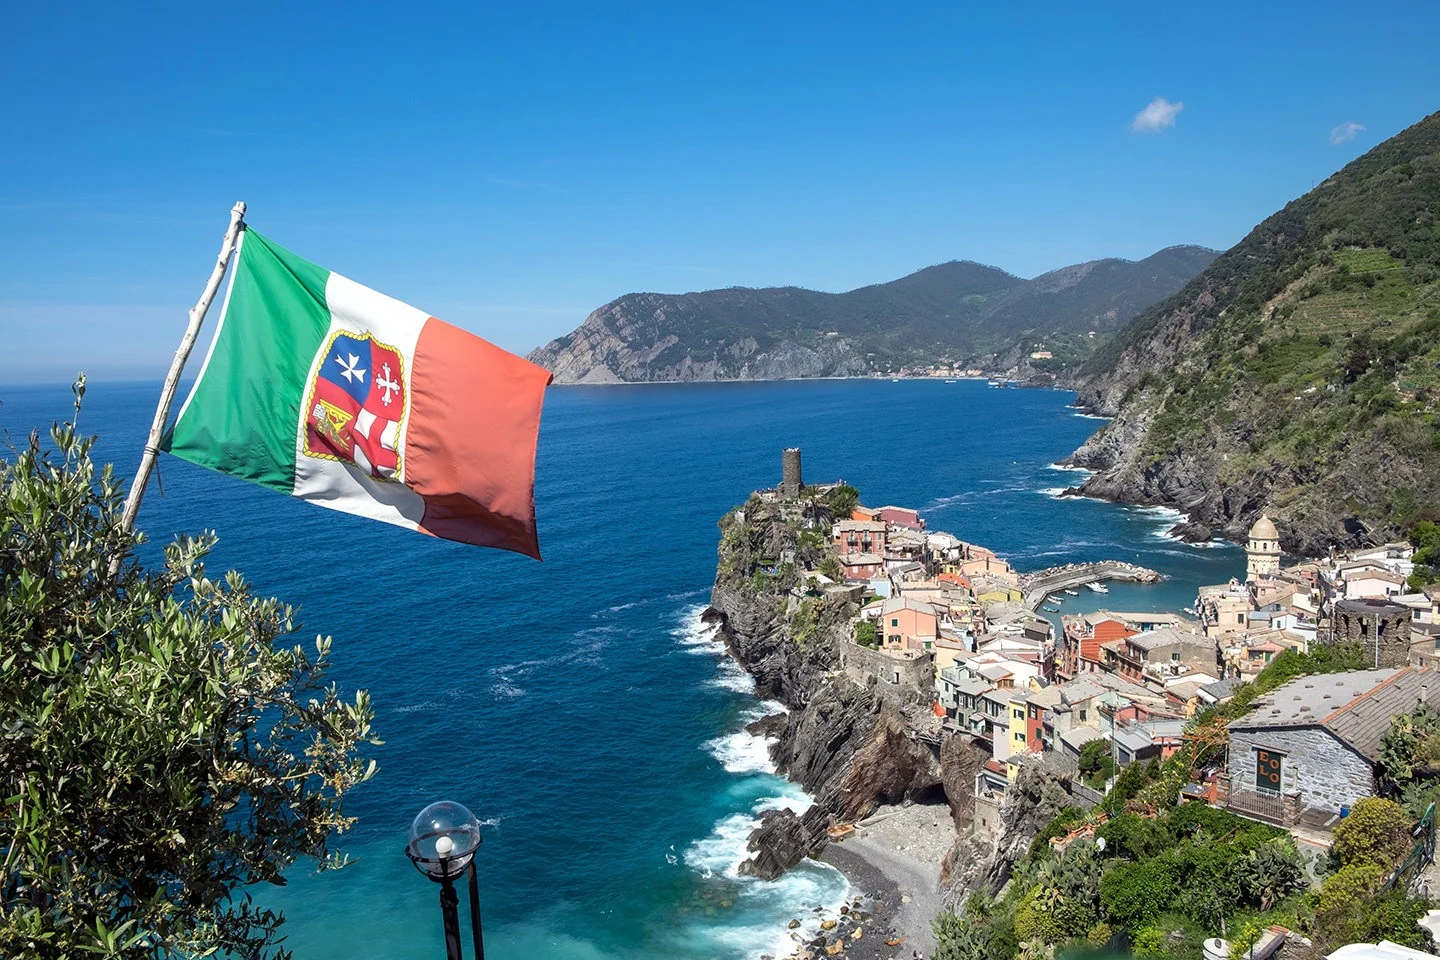 Vernazza from the cliff path with a flag blowing in the wind